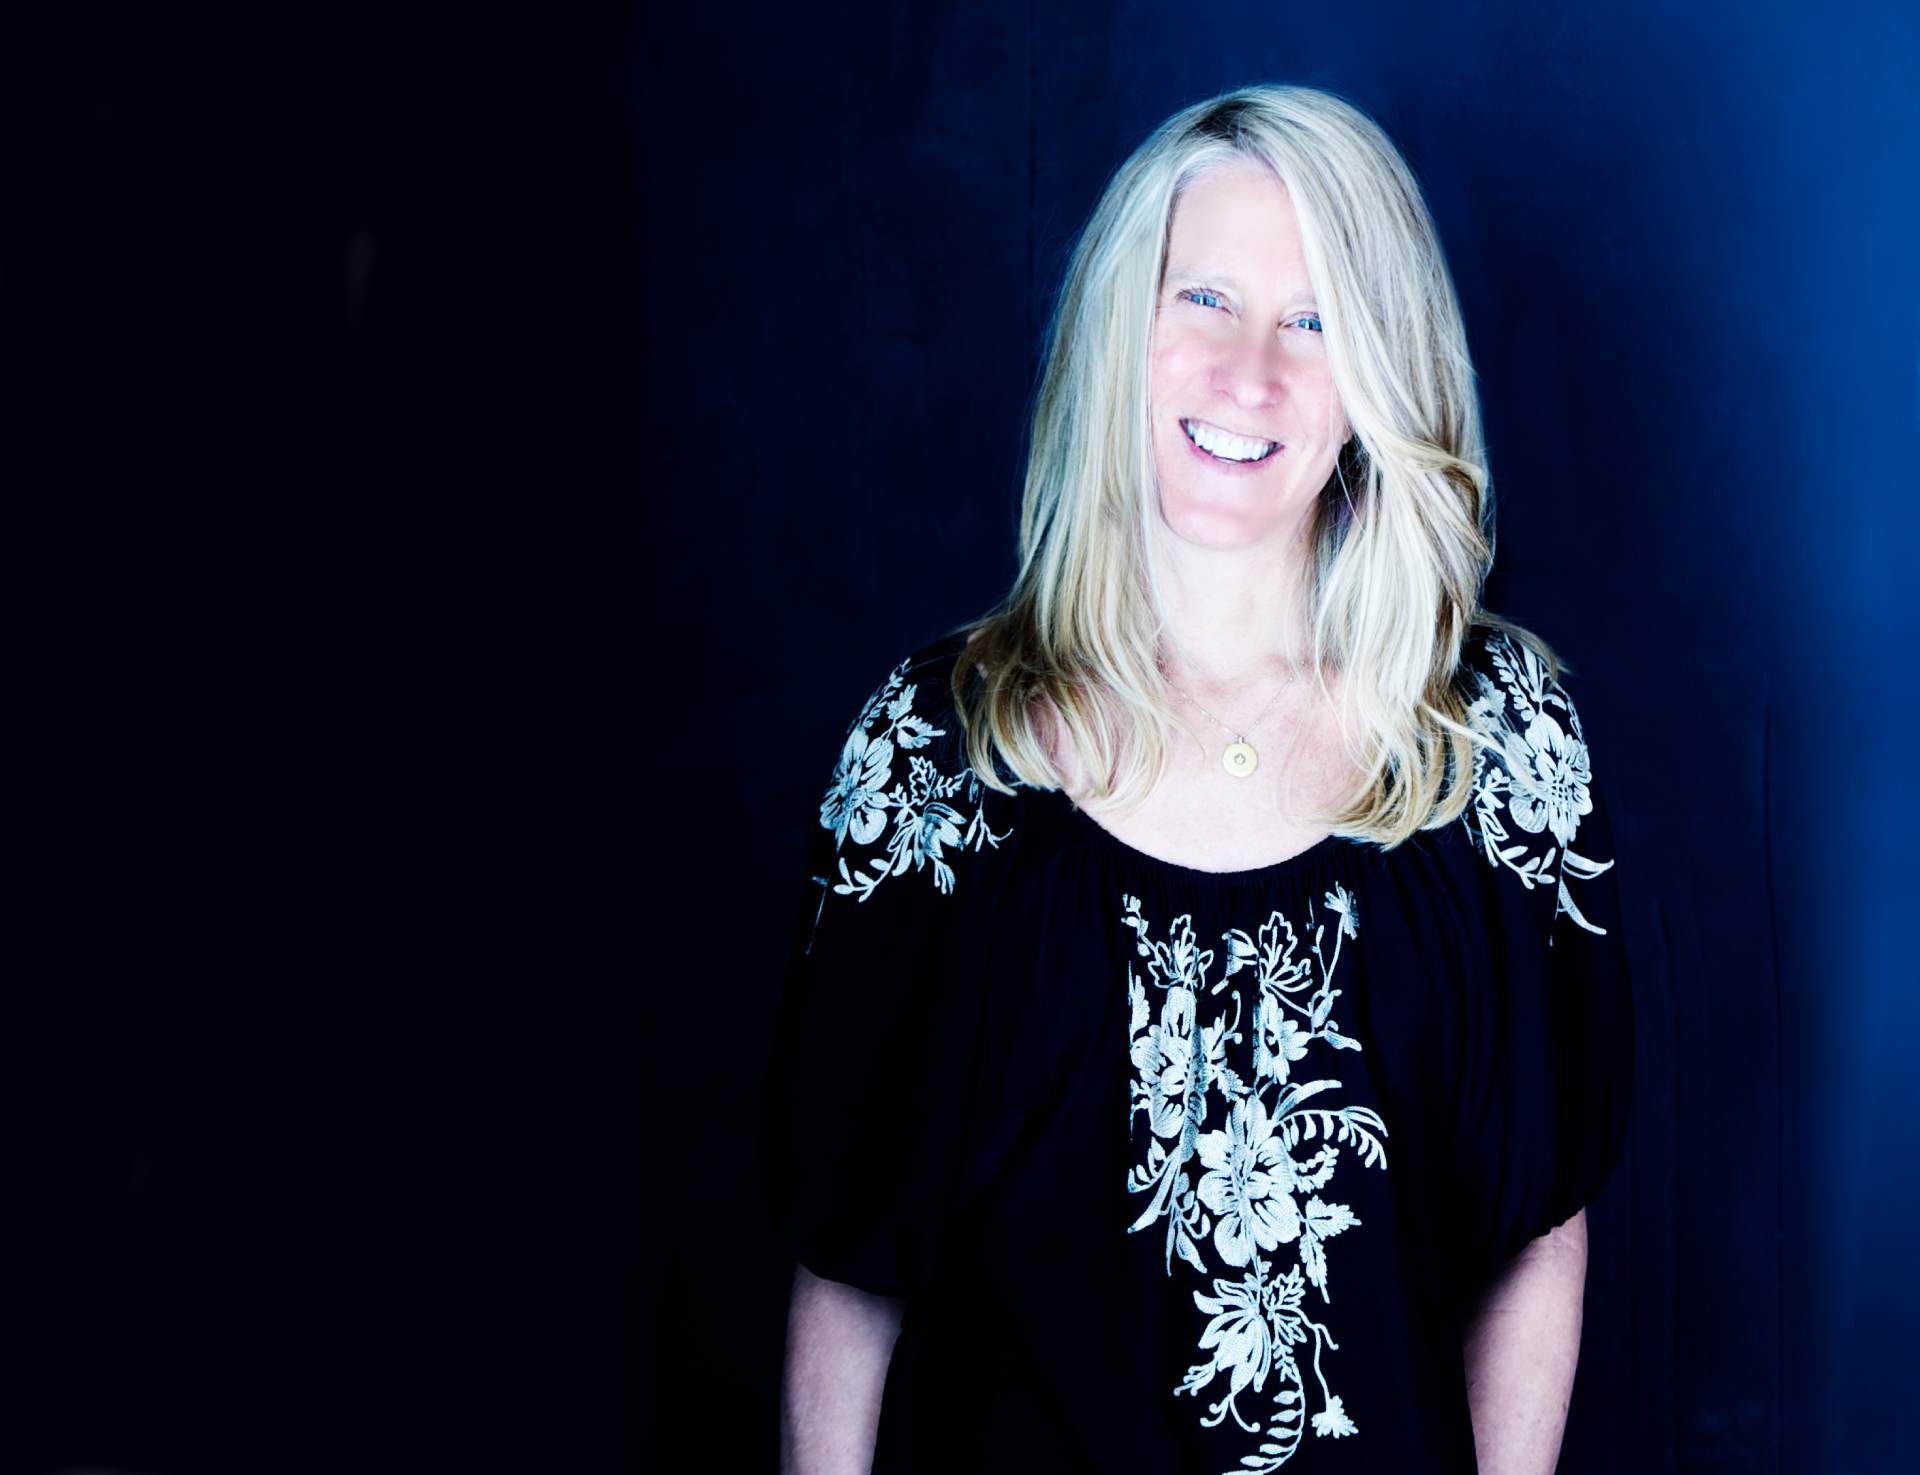 Online nutrition coach Tanya Mark smiles while standing in front of a blue background.